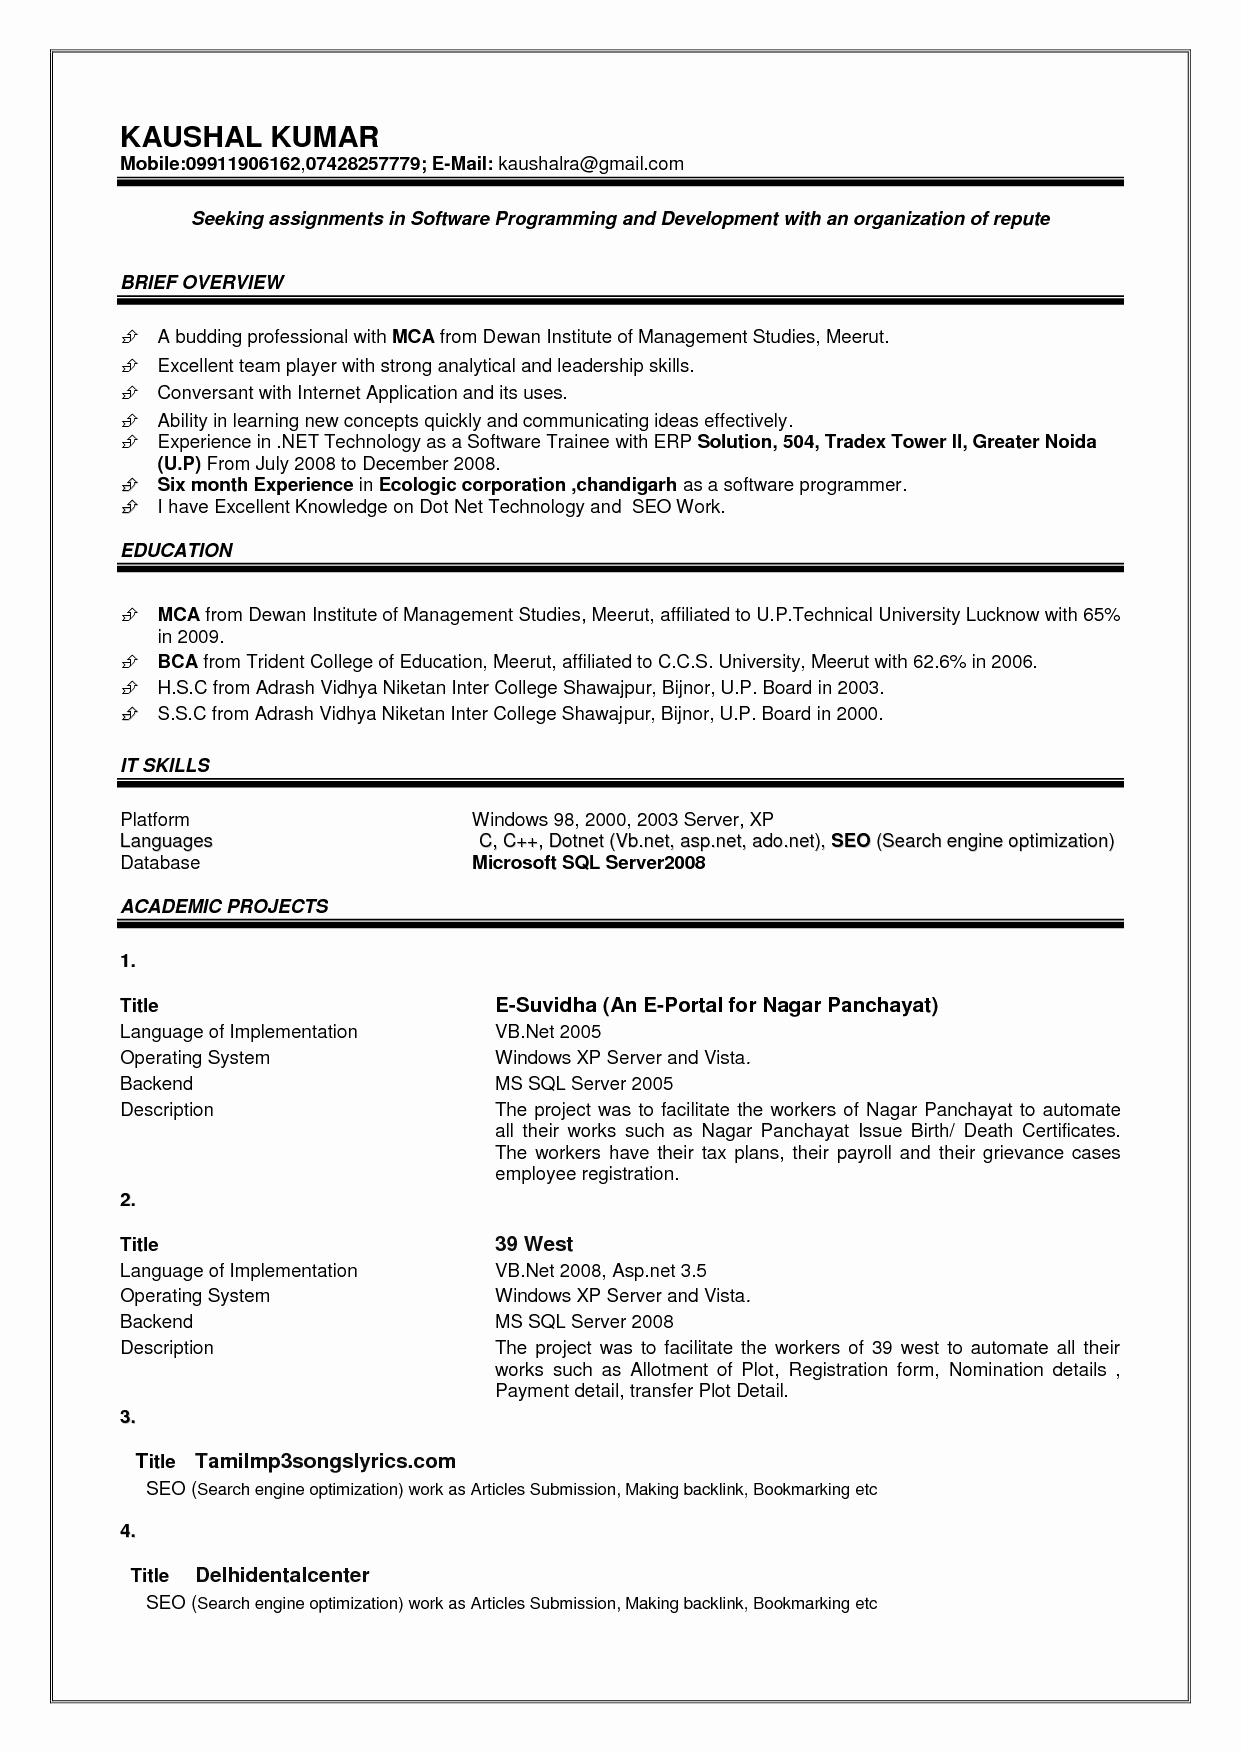 Resume format for Freshers M Over Cv and Resume Samples